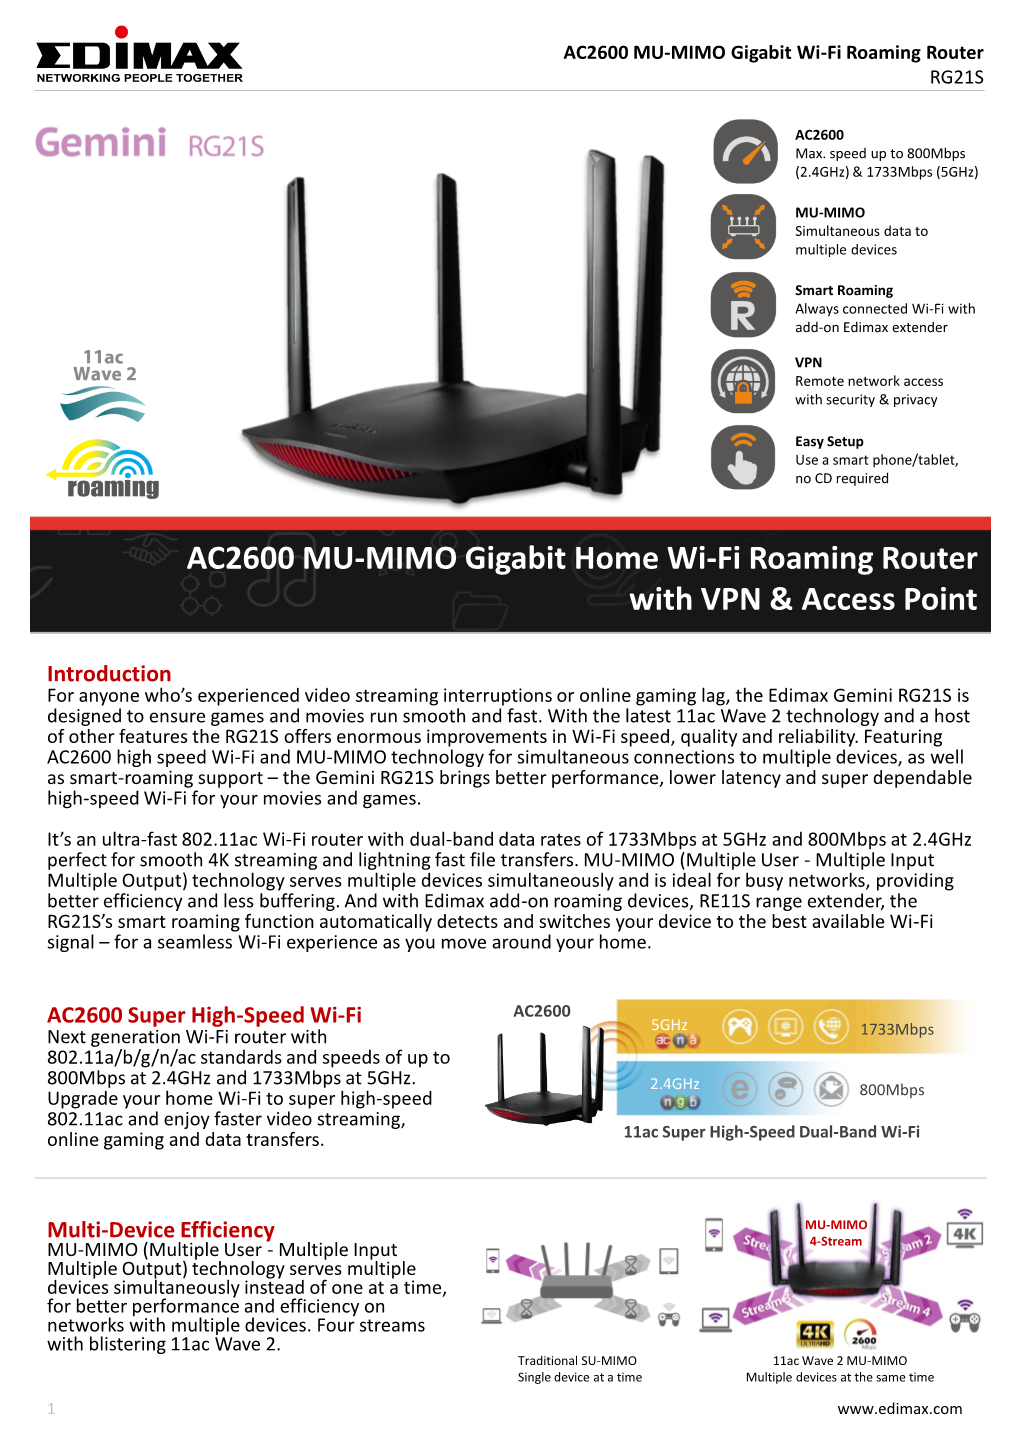 AC2600 MU-MIMO Gigabit Home Wi-Fi Roaming Router with VPN & Access Point